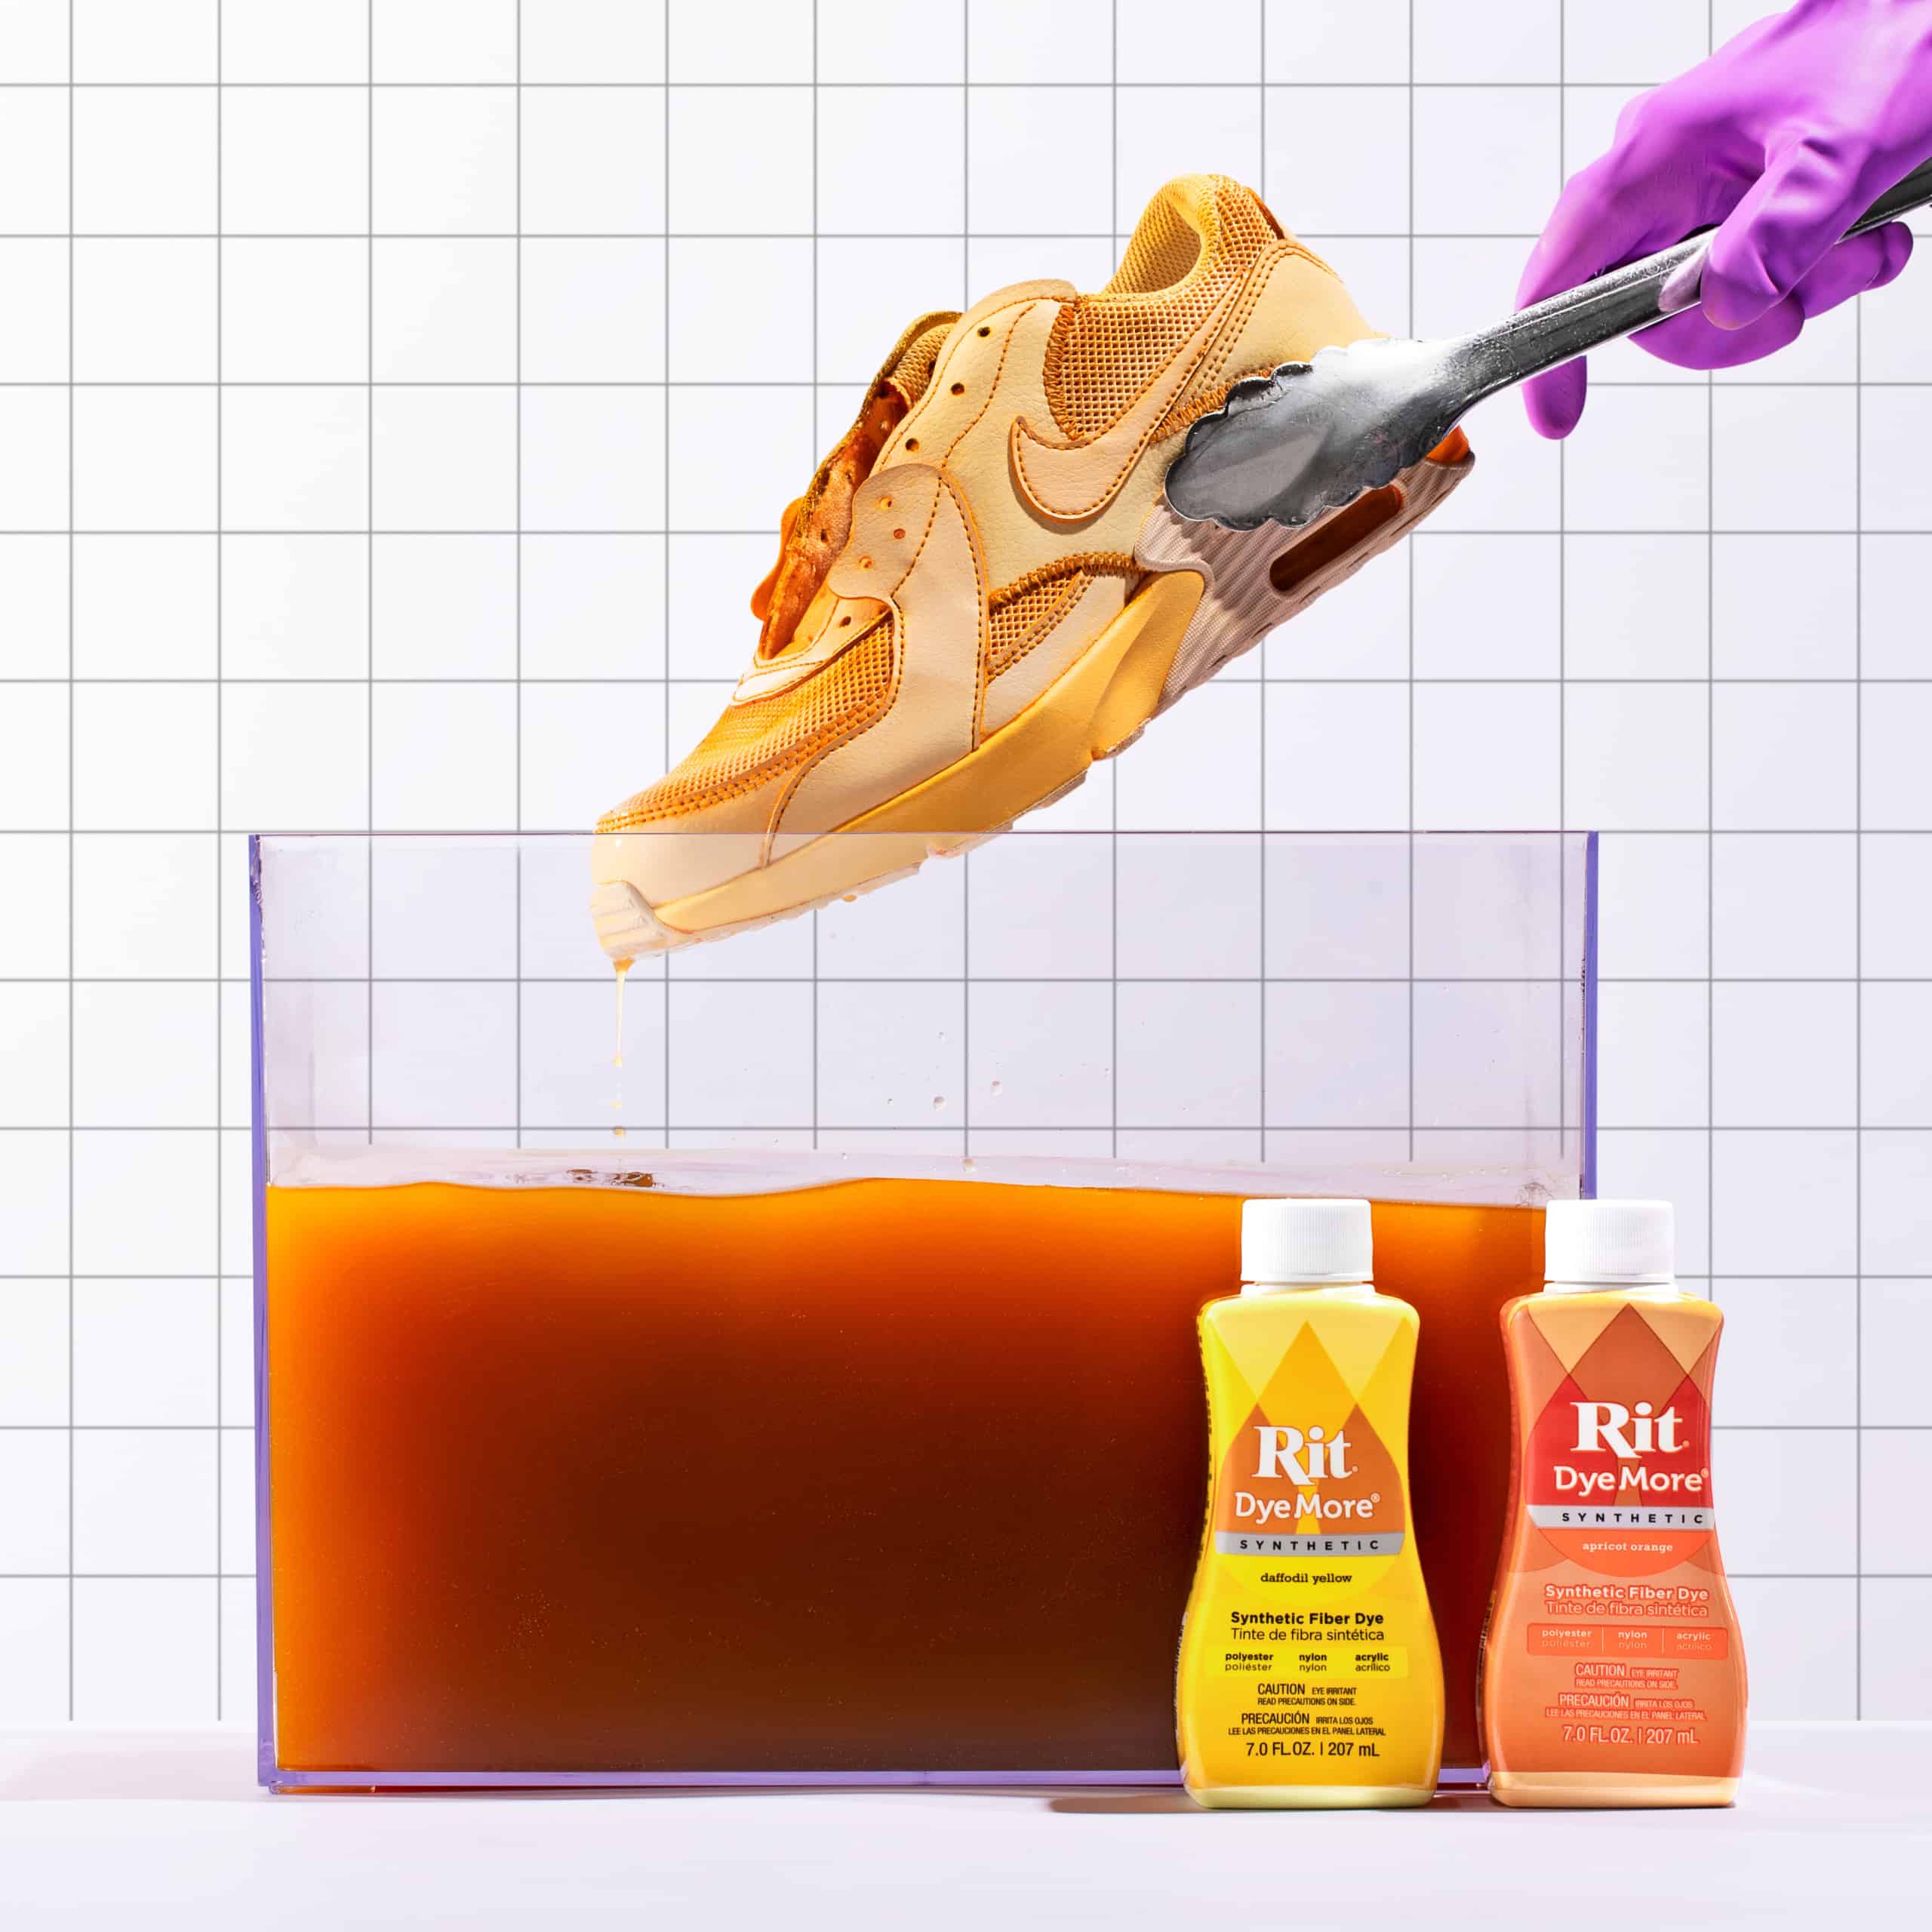 Dye Your Sneakers with DyeMore – Rit Dye